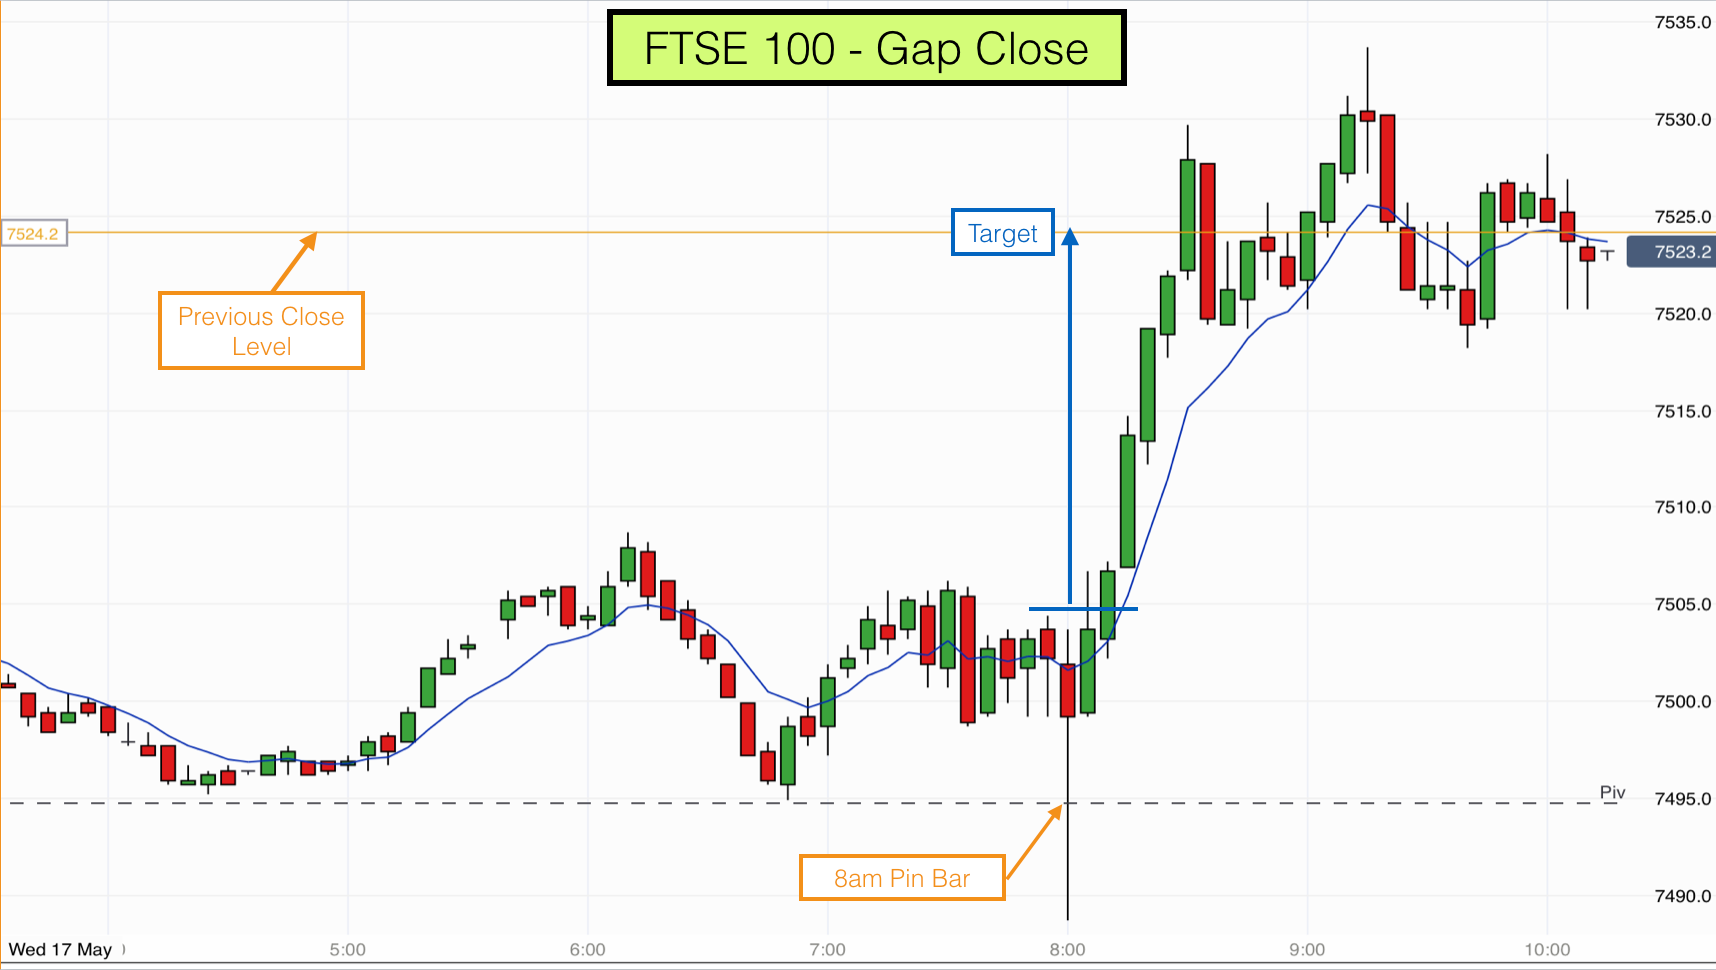 Day Trading FTSE & DAX 5 minute charts | 17th May 2017